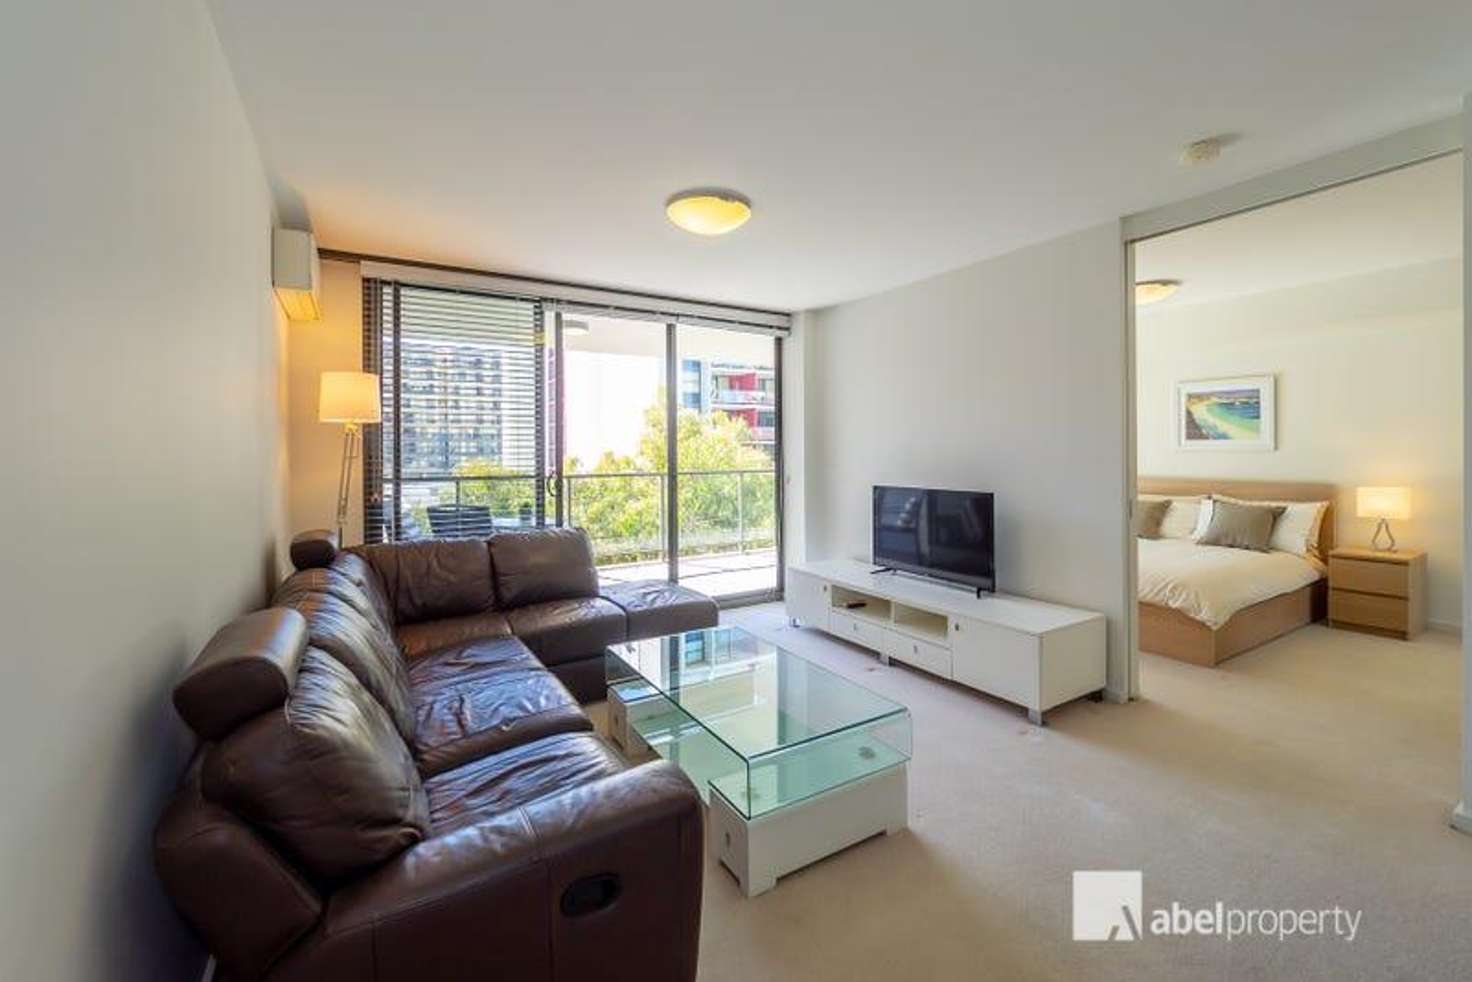 Main view of Homely apartment listing, 34/131 Adelaide Terrace, East Perth WA 6004